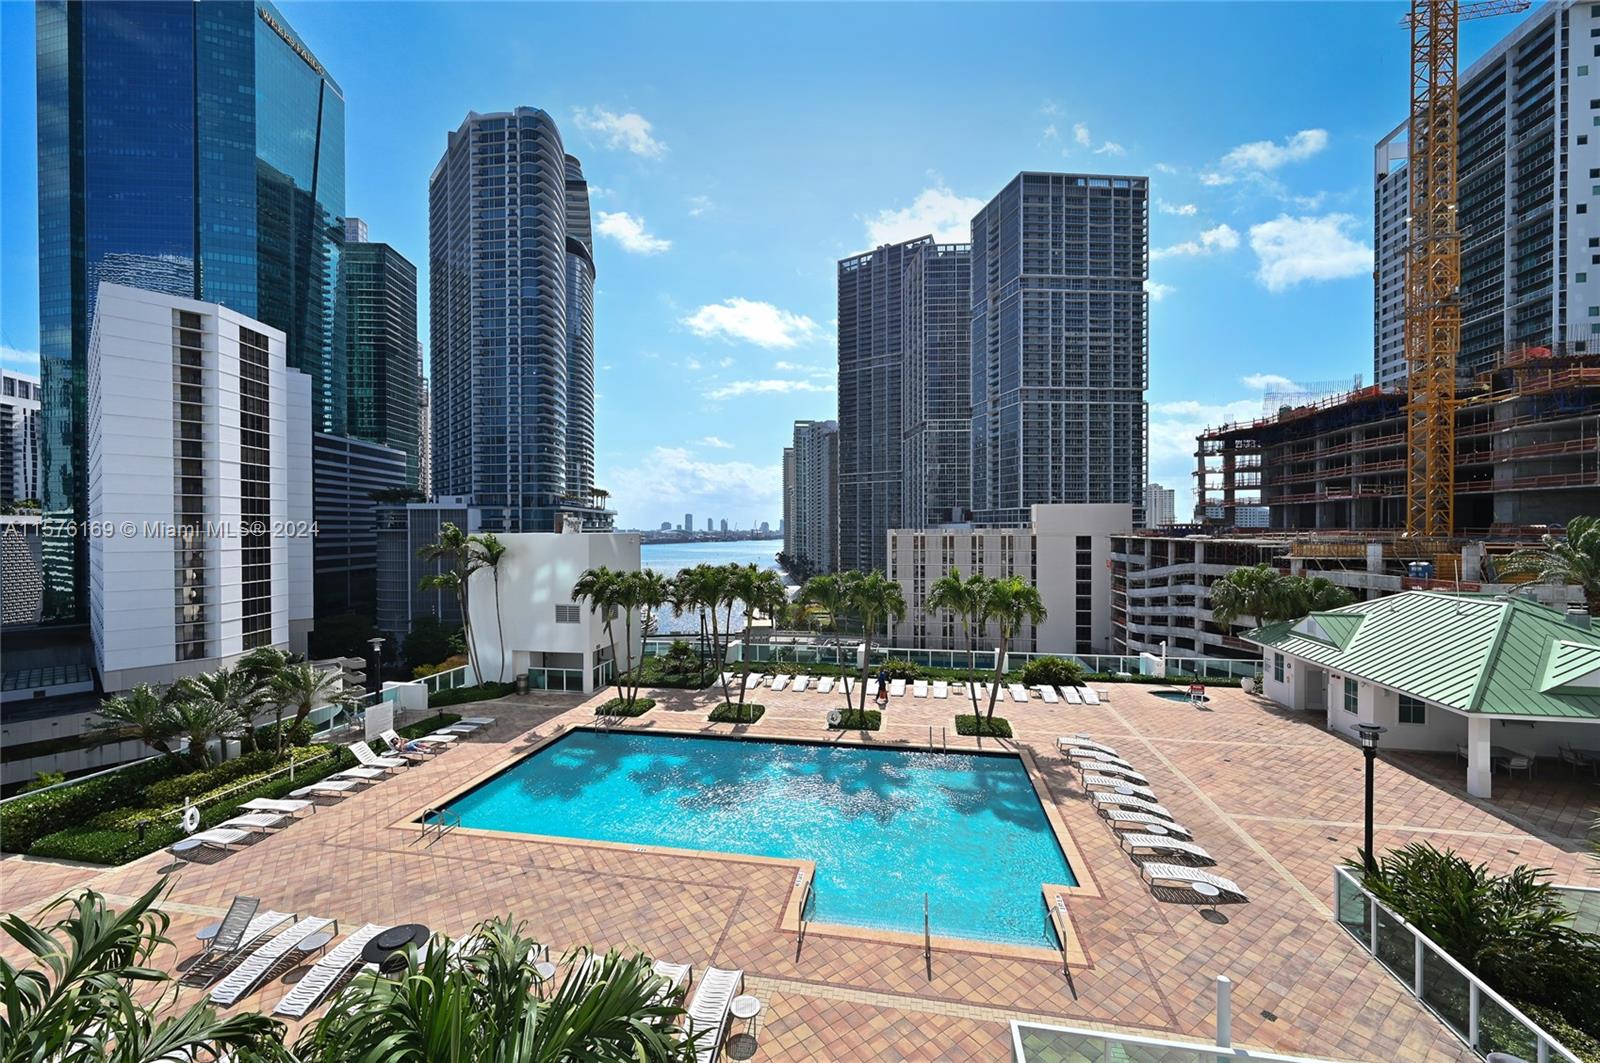 Make this modern and chic, large furnished one bedroom unit yours!  Soak in bay and city views from your oversized 140 SqFt balcony while living in the heart of Brickell - Miami's most vibrant neighborhood.  This apartment has the open floor plan you are looking for with a European kitchen with stainless steel appliances, granite countertops and washer/dryer in the unit.  Brickell on the River offers 24-hour security and valet, large pool deck with hot tub, gym, steam room, sauna, business center, party room, BBQ area, and more.  Vacant and easy to show.  Available seasonal or annual.  Rental rate may vary depending on dates and length of stay.